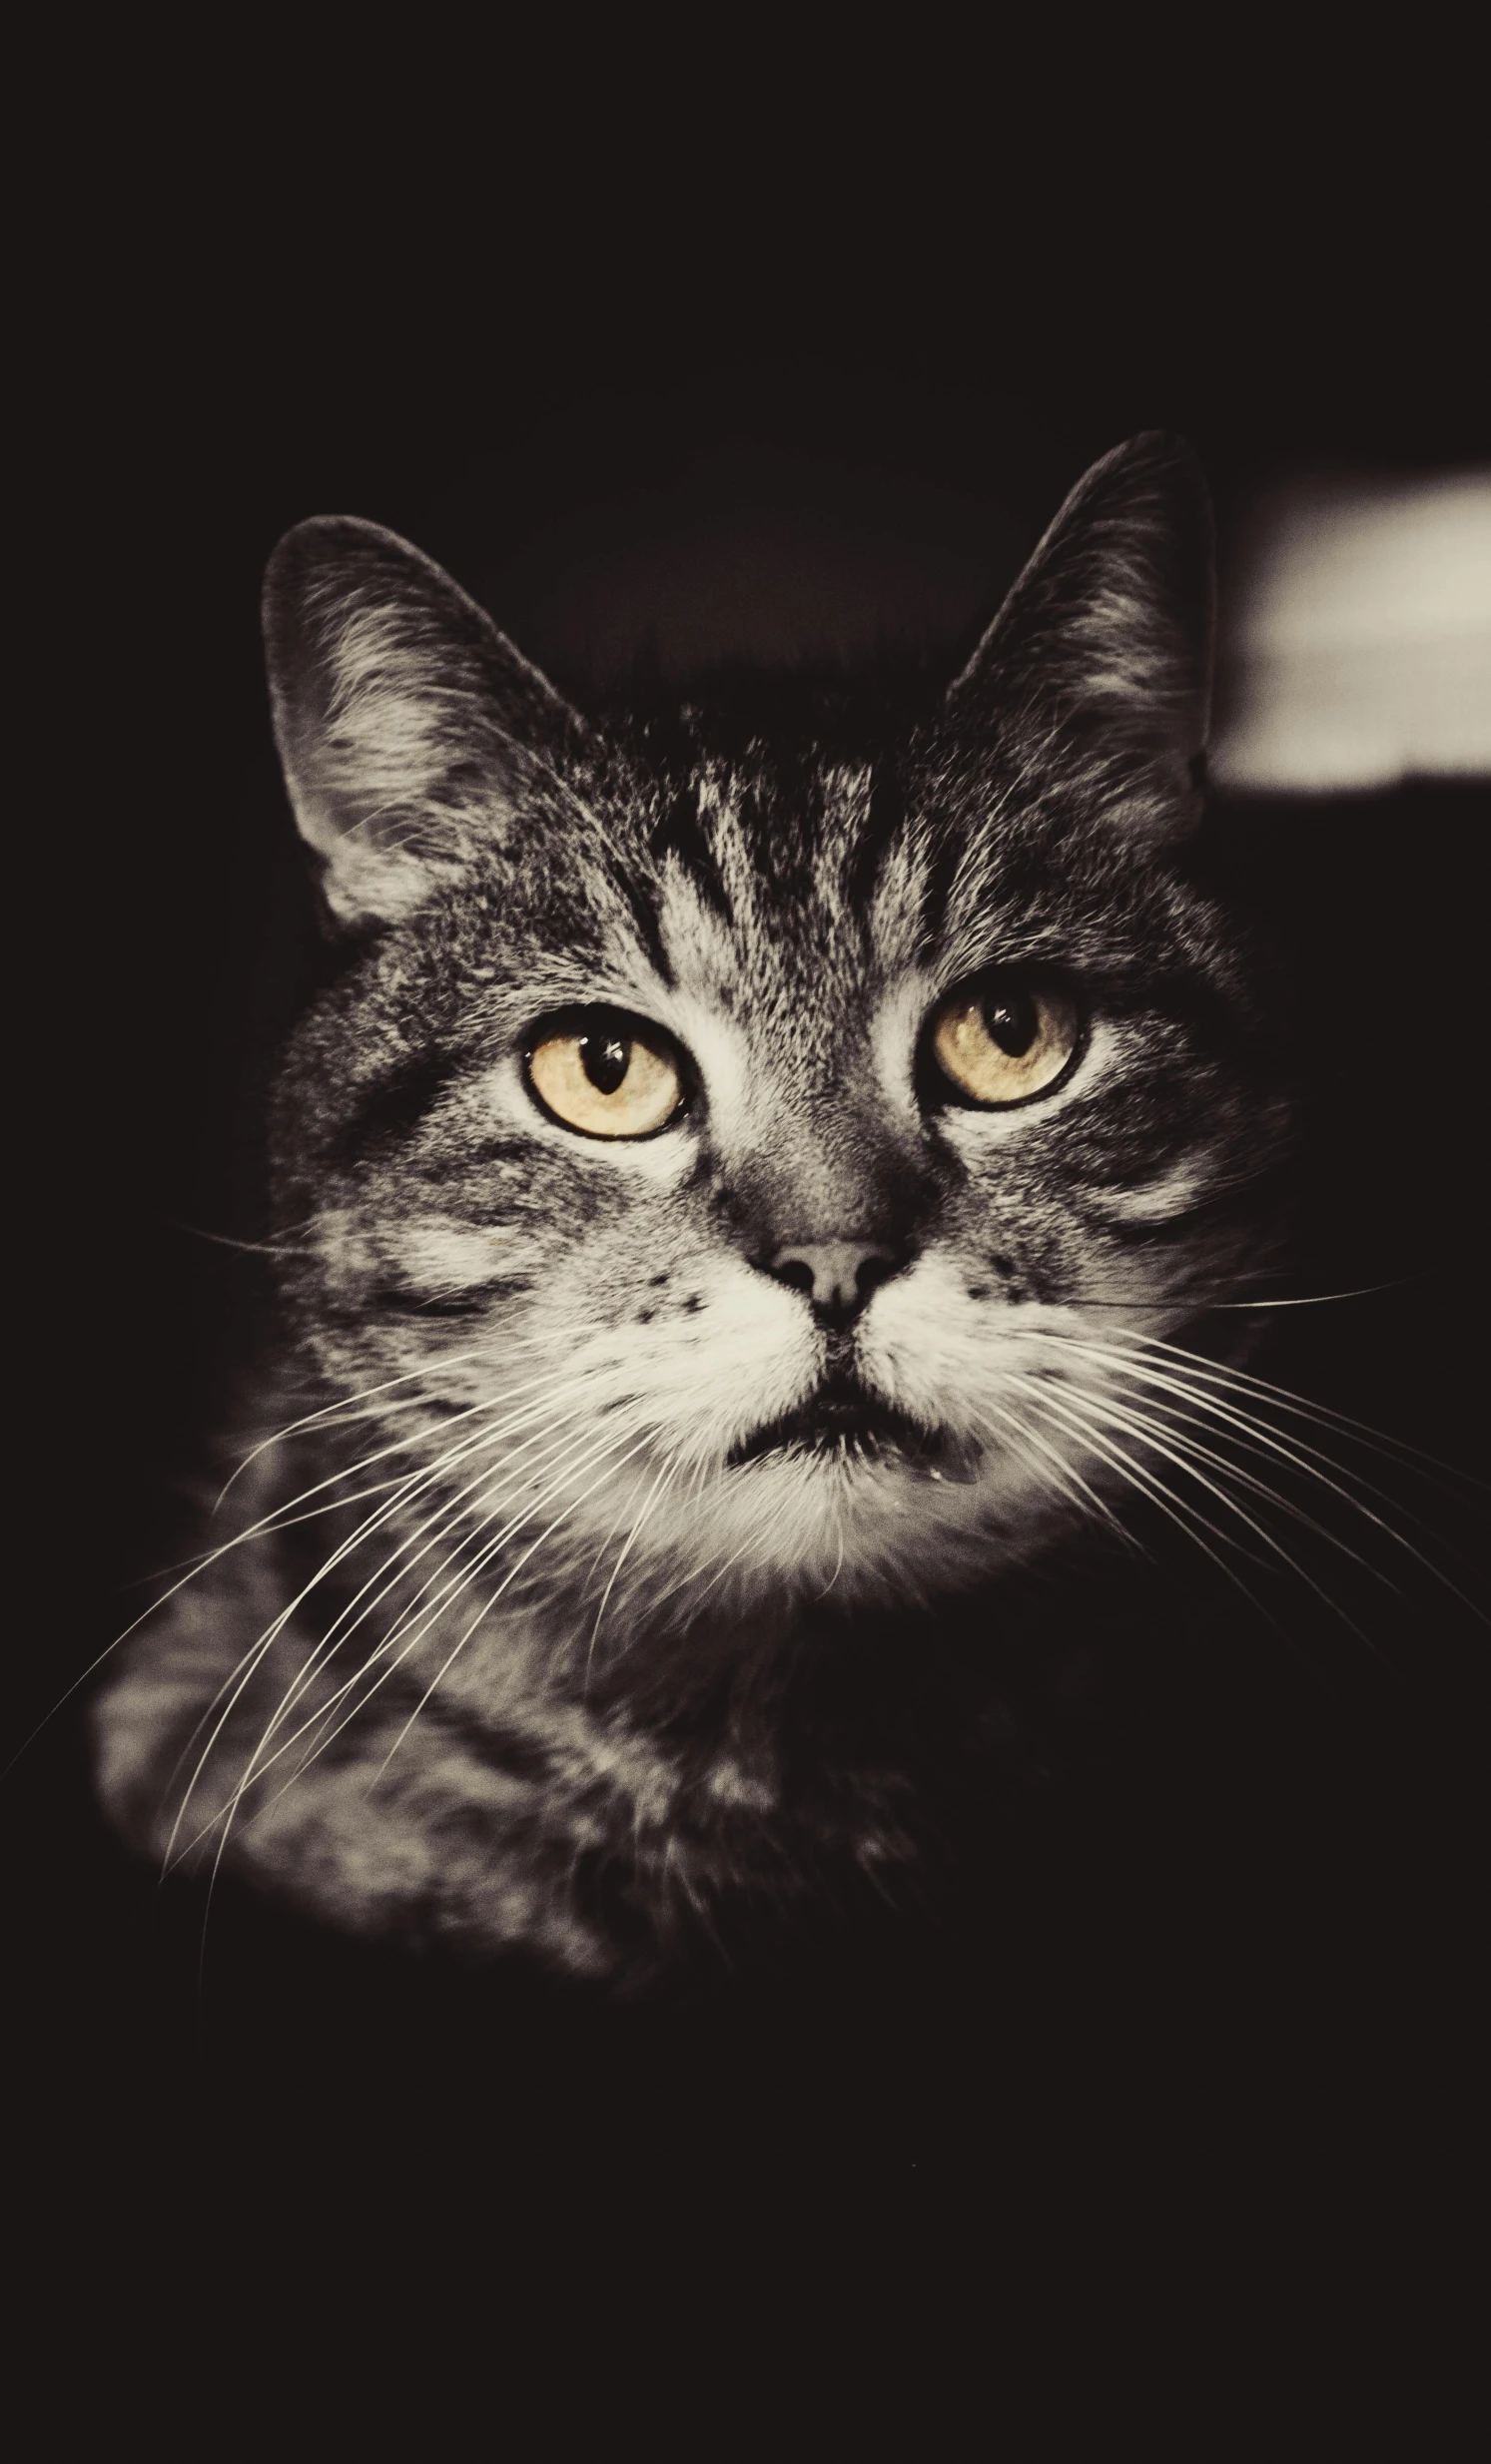 a black and white photo of a cat, unsplash, renaissance, portrait of garfield, with a white nose, medium format, getty images